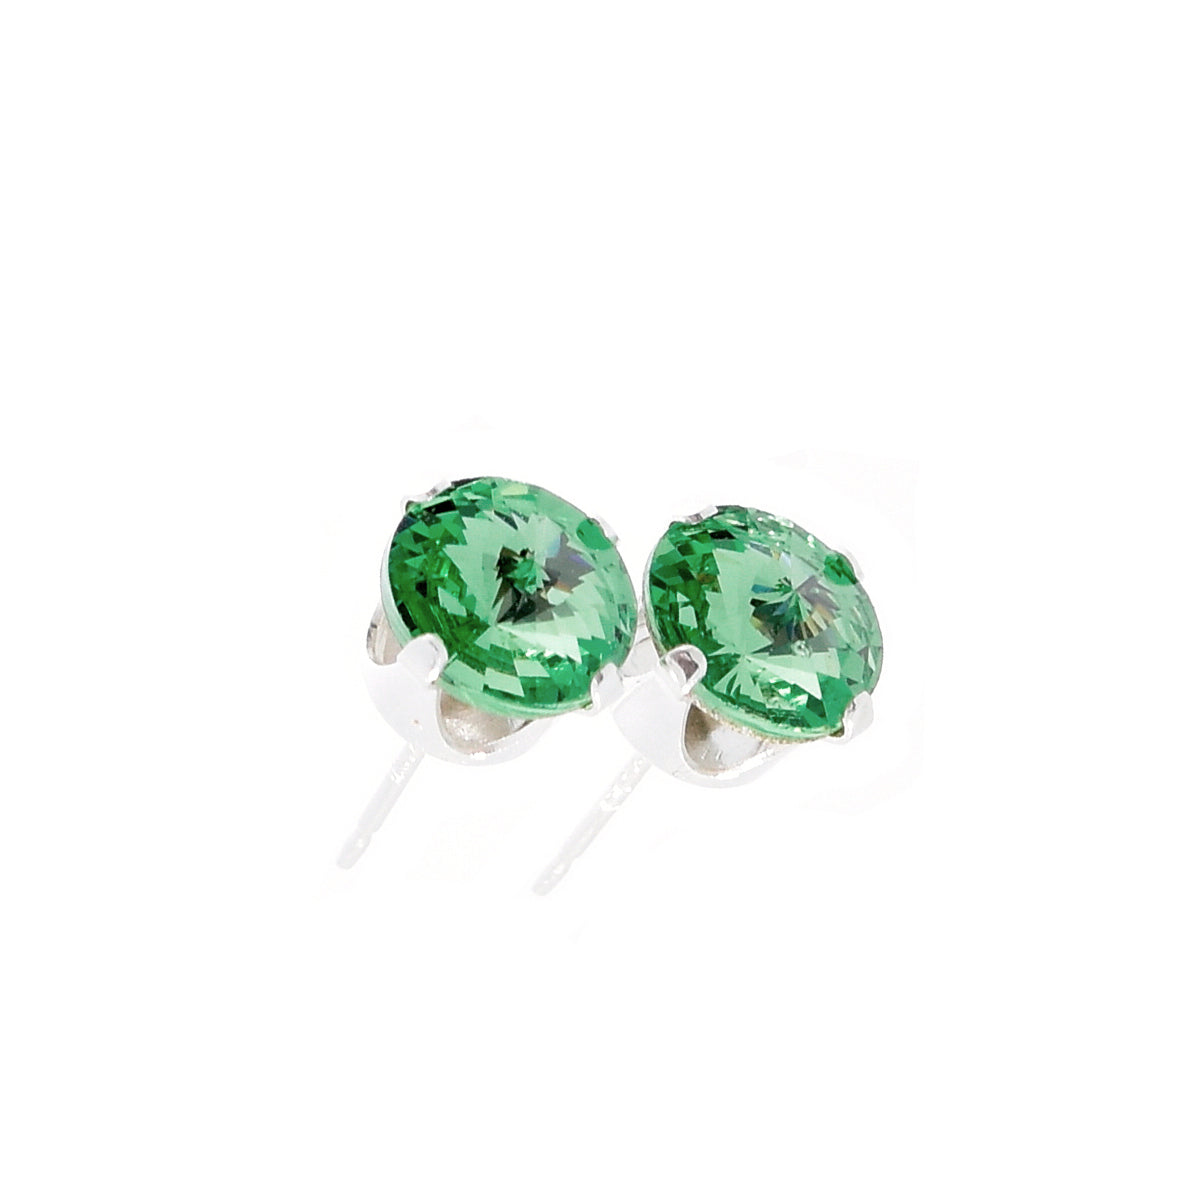 pewterhooter® Women's Classic Collection 925 Sterling silver earrings with brilliant Peridot Green crystals, packaged in a gift box for any occasion.